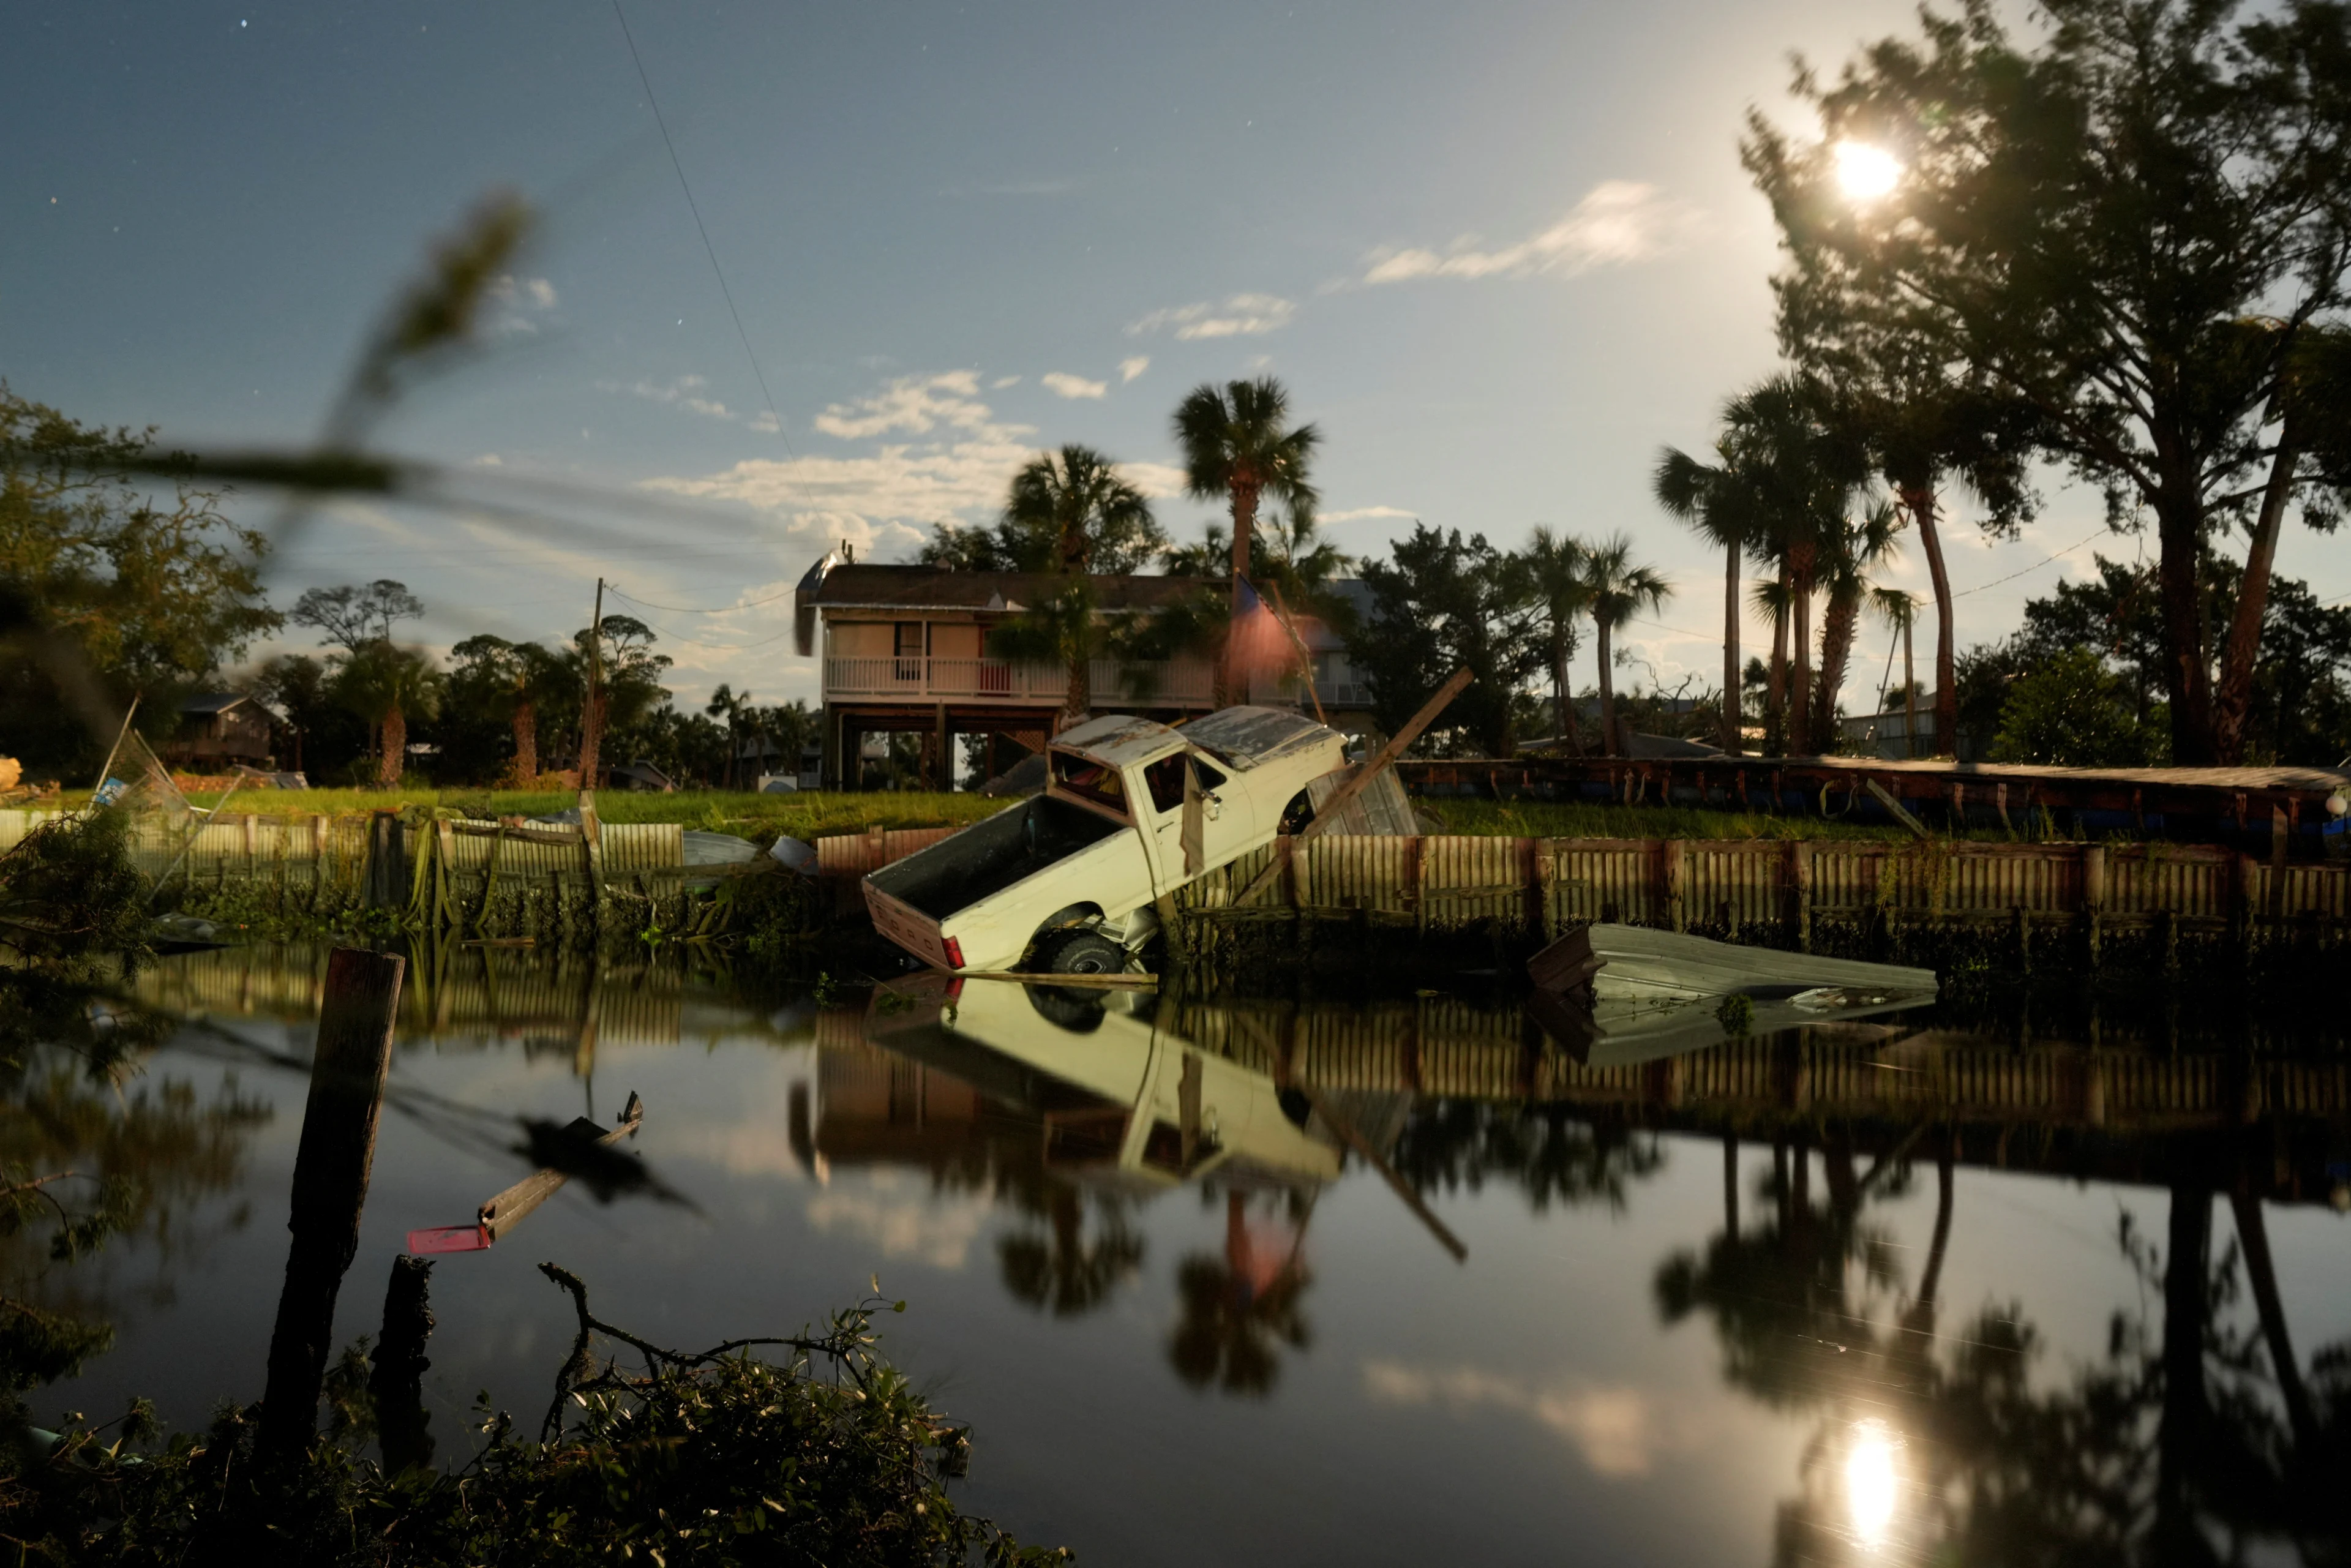 Reuters: A vehicle is seen in a canal after the arrival of Hurricane Idalia in Horseshoe Beach, Florida, U.S., August 30, 2023. REUTERS/Cheney Orr